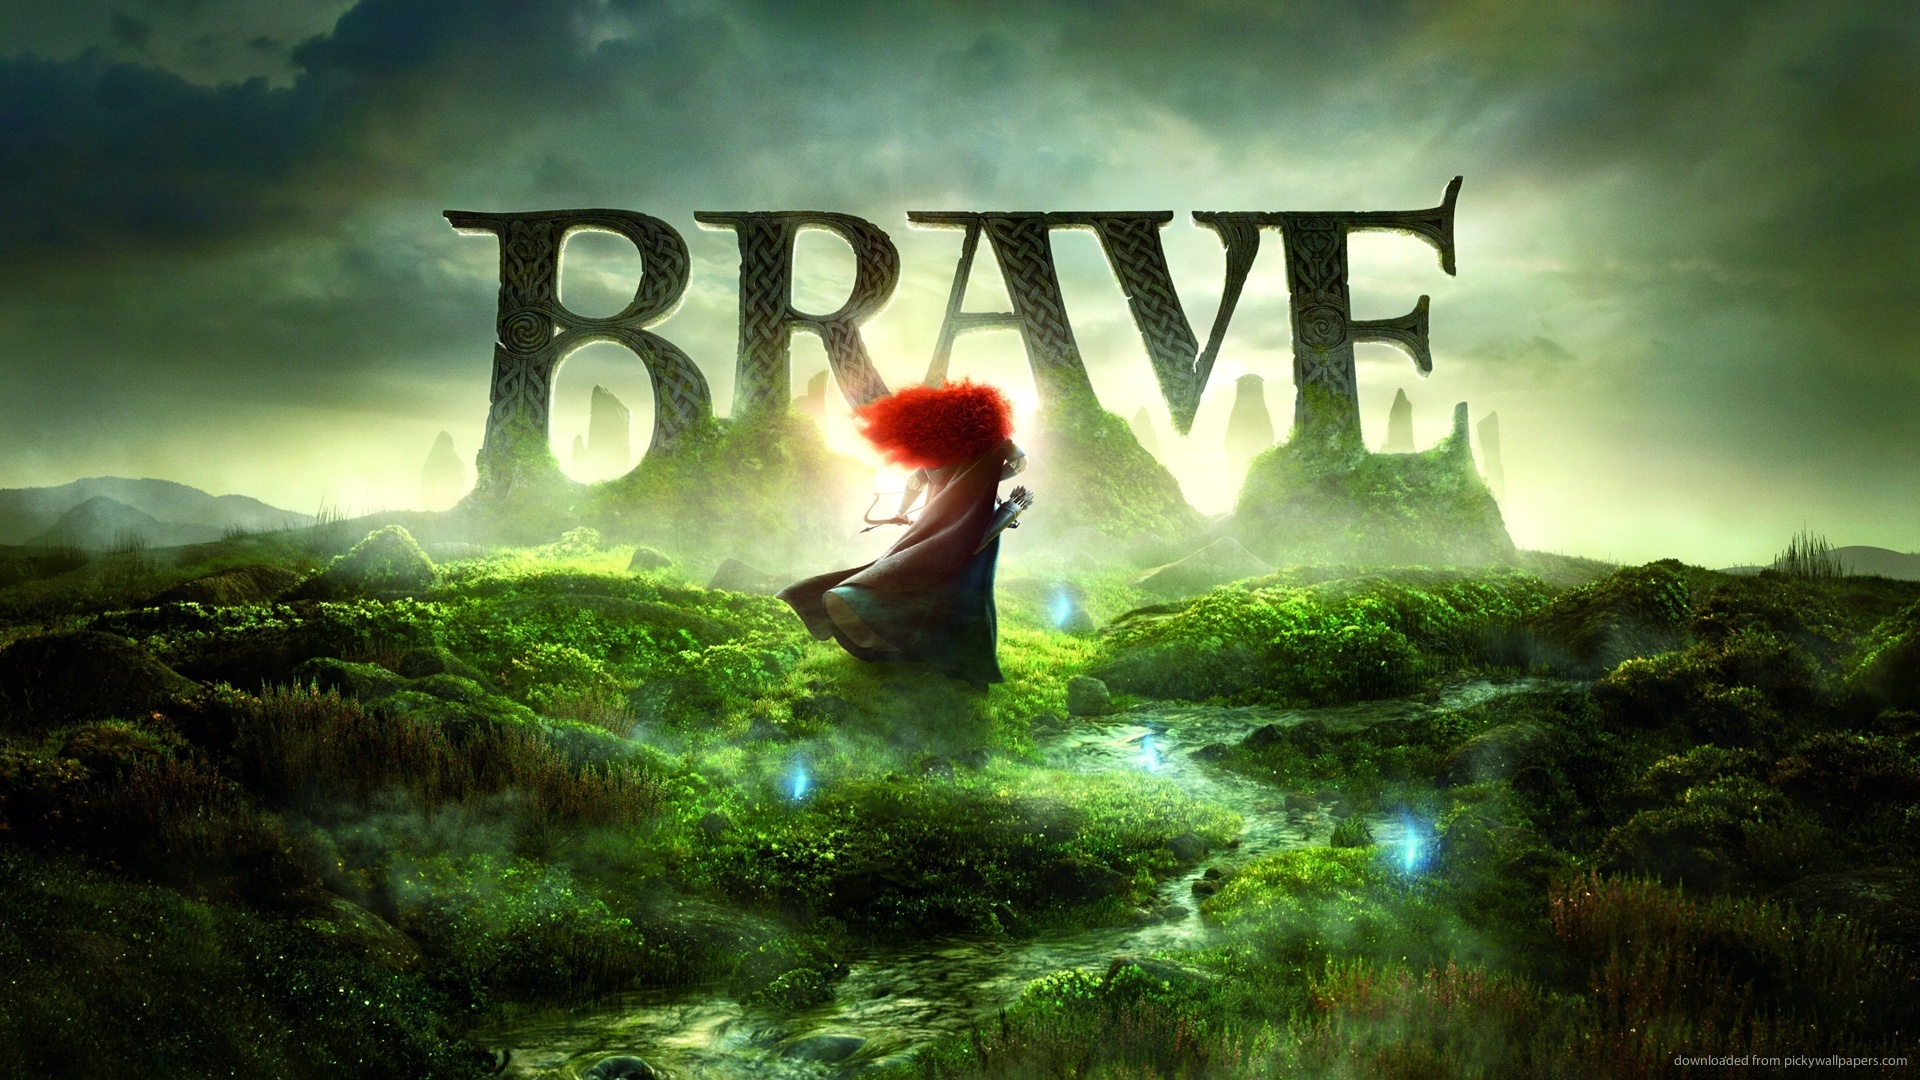 Download Brave Animated Movie Poster HD Wallpaper Search more high